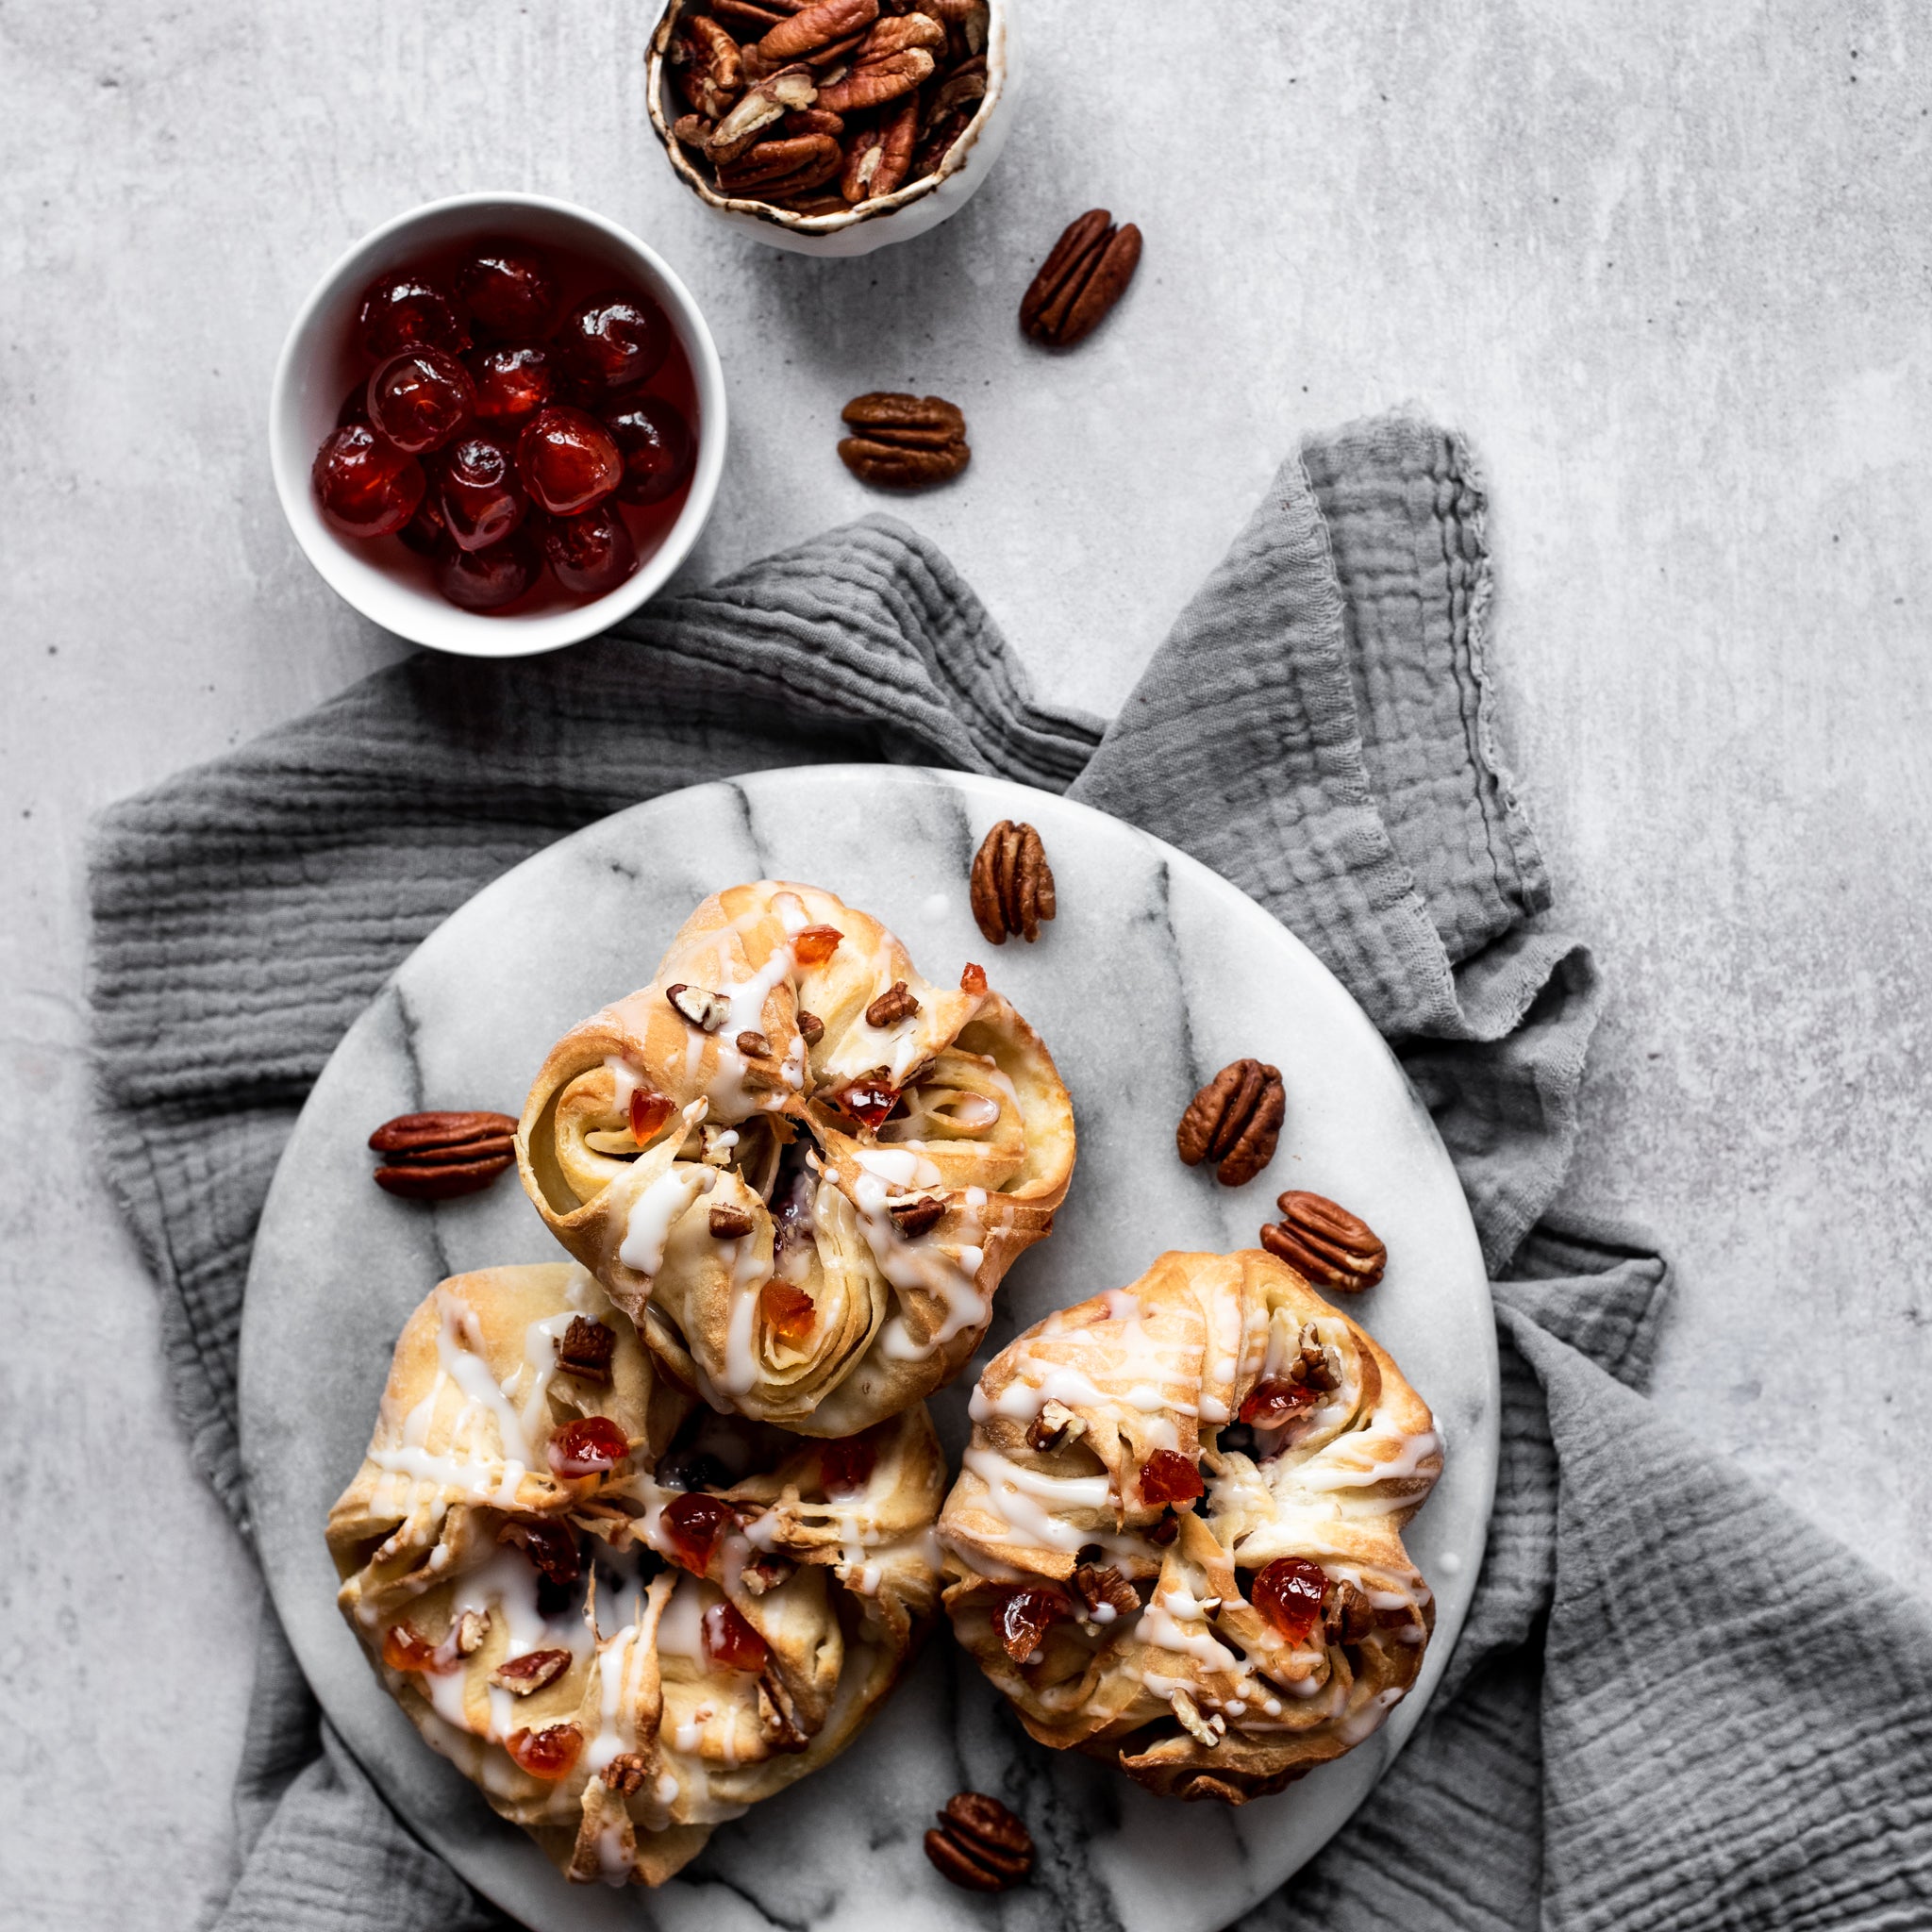 Over head plate of three danish pastries with pecan nuts and cherries